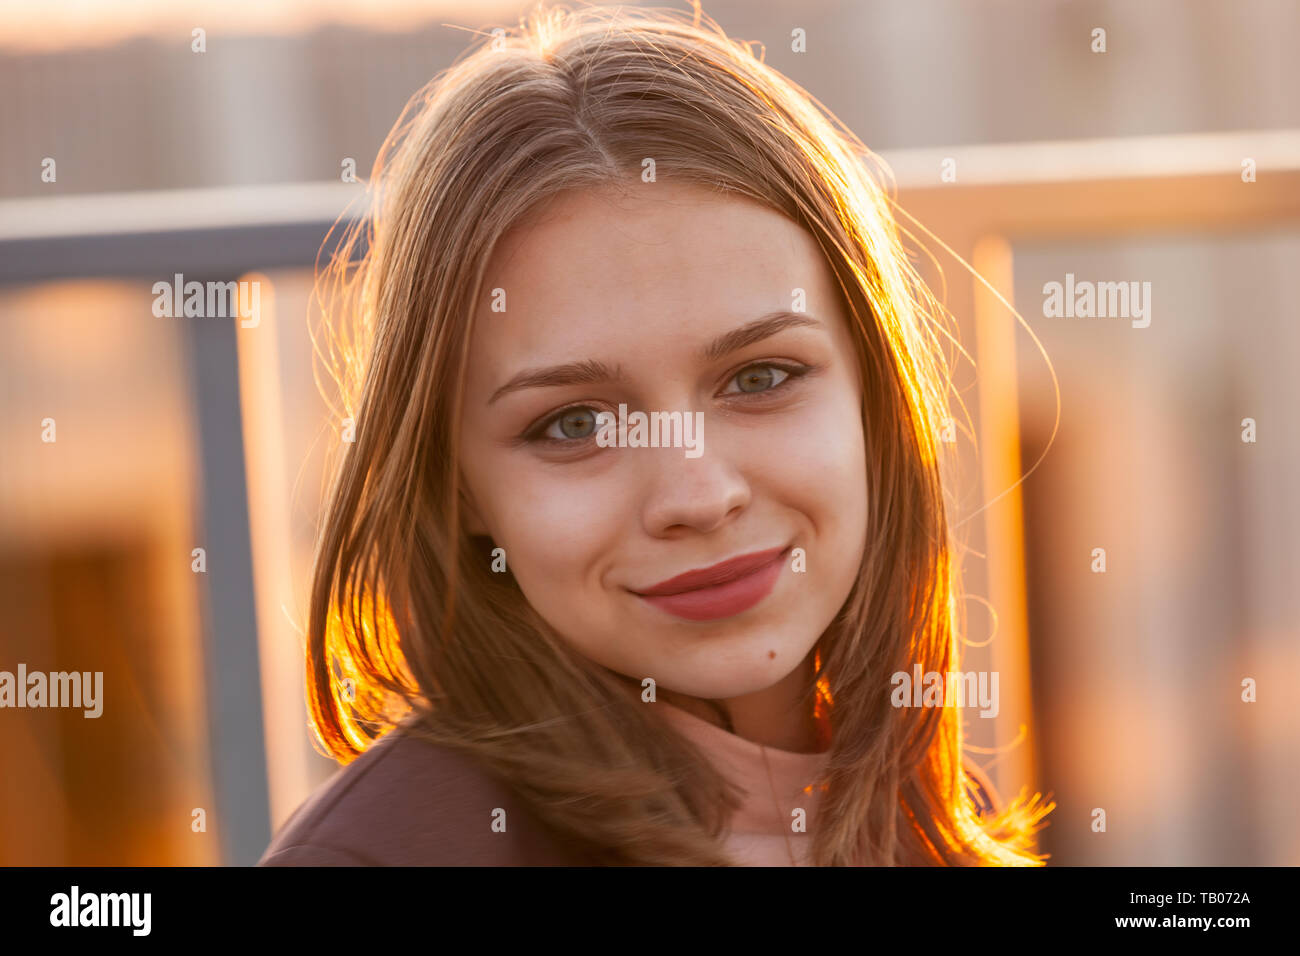 Beautiful smiling teenage girl, close up outdoor portrait with back-lit sunlight Stock Photo